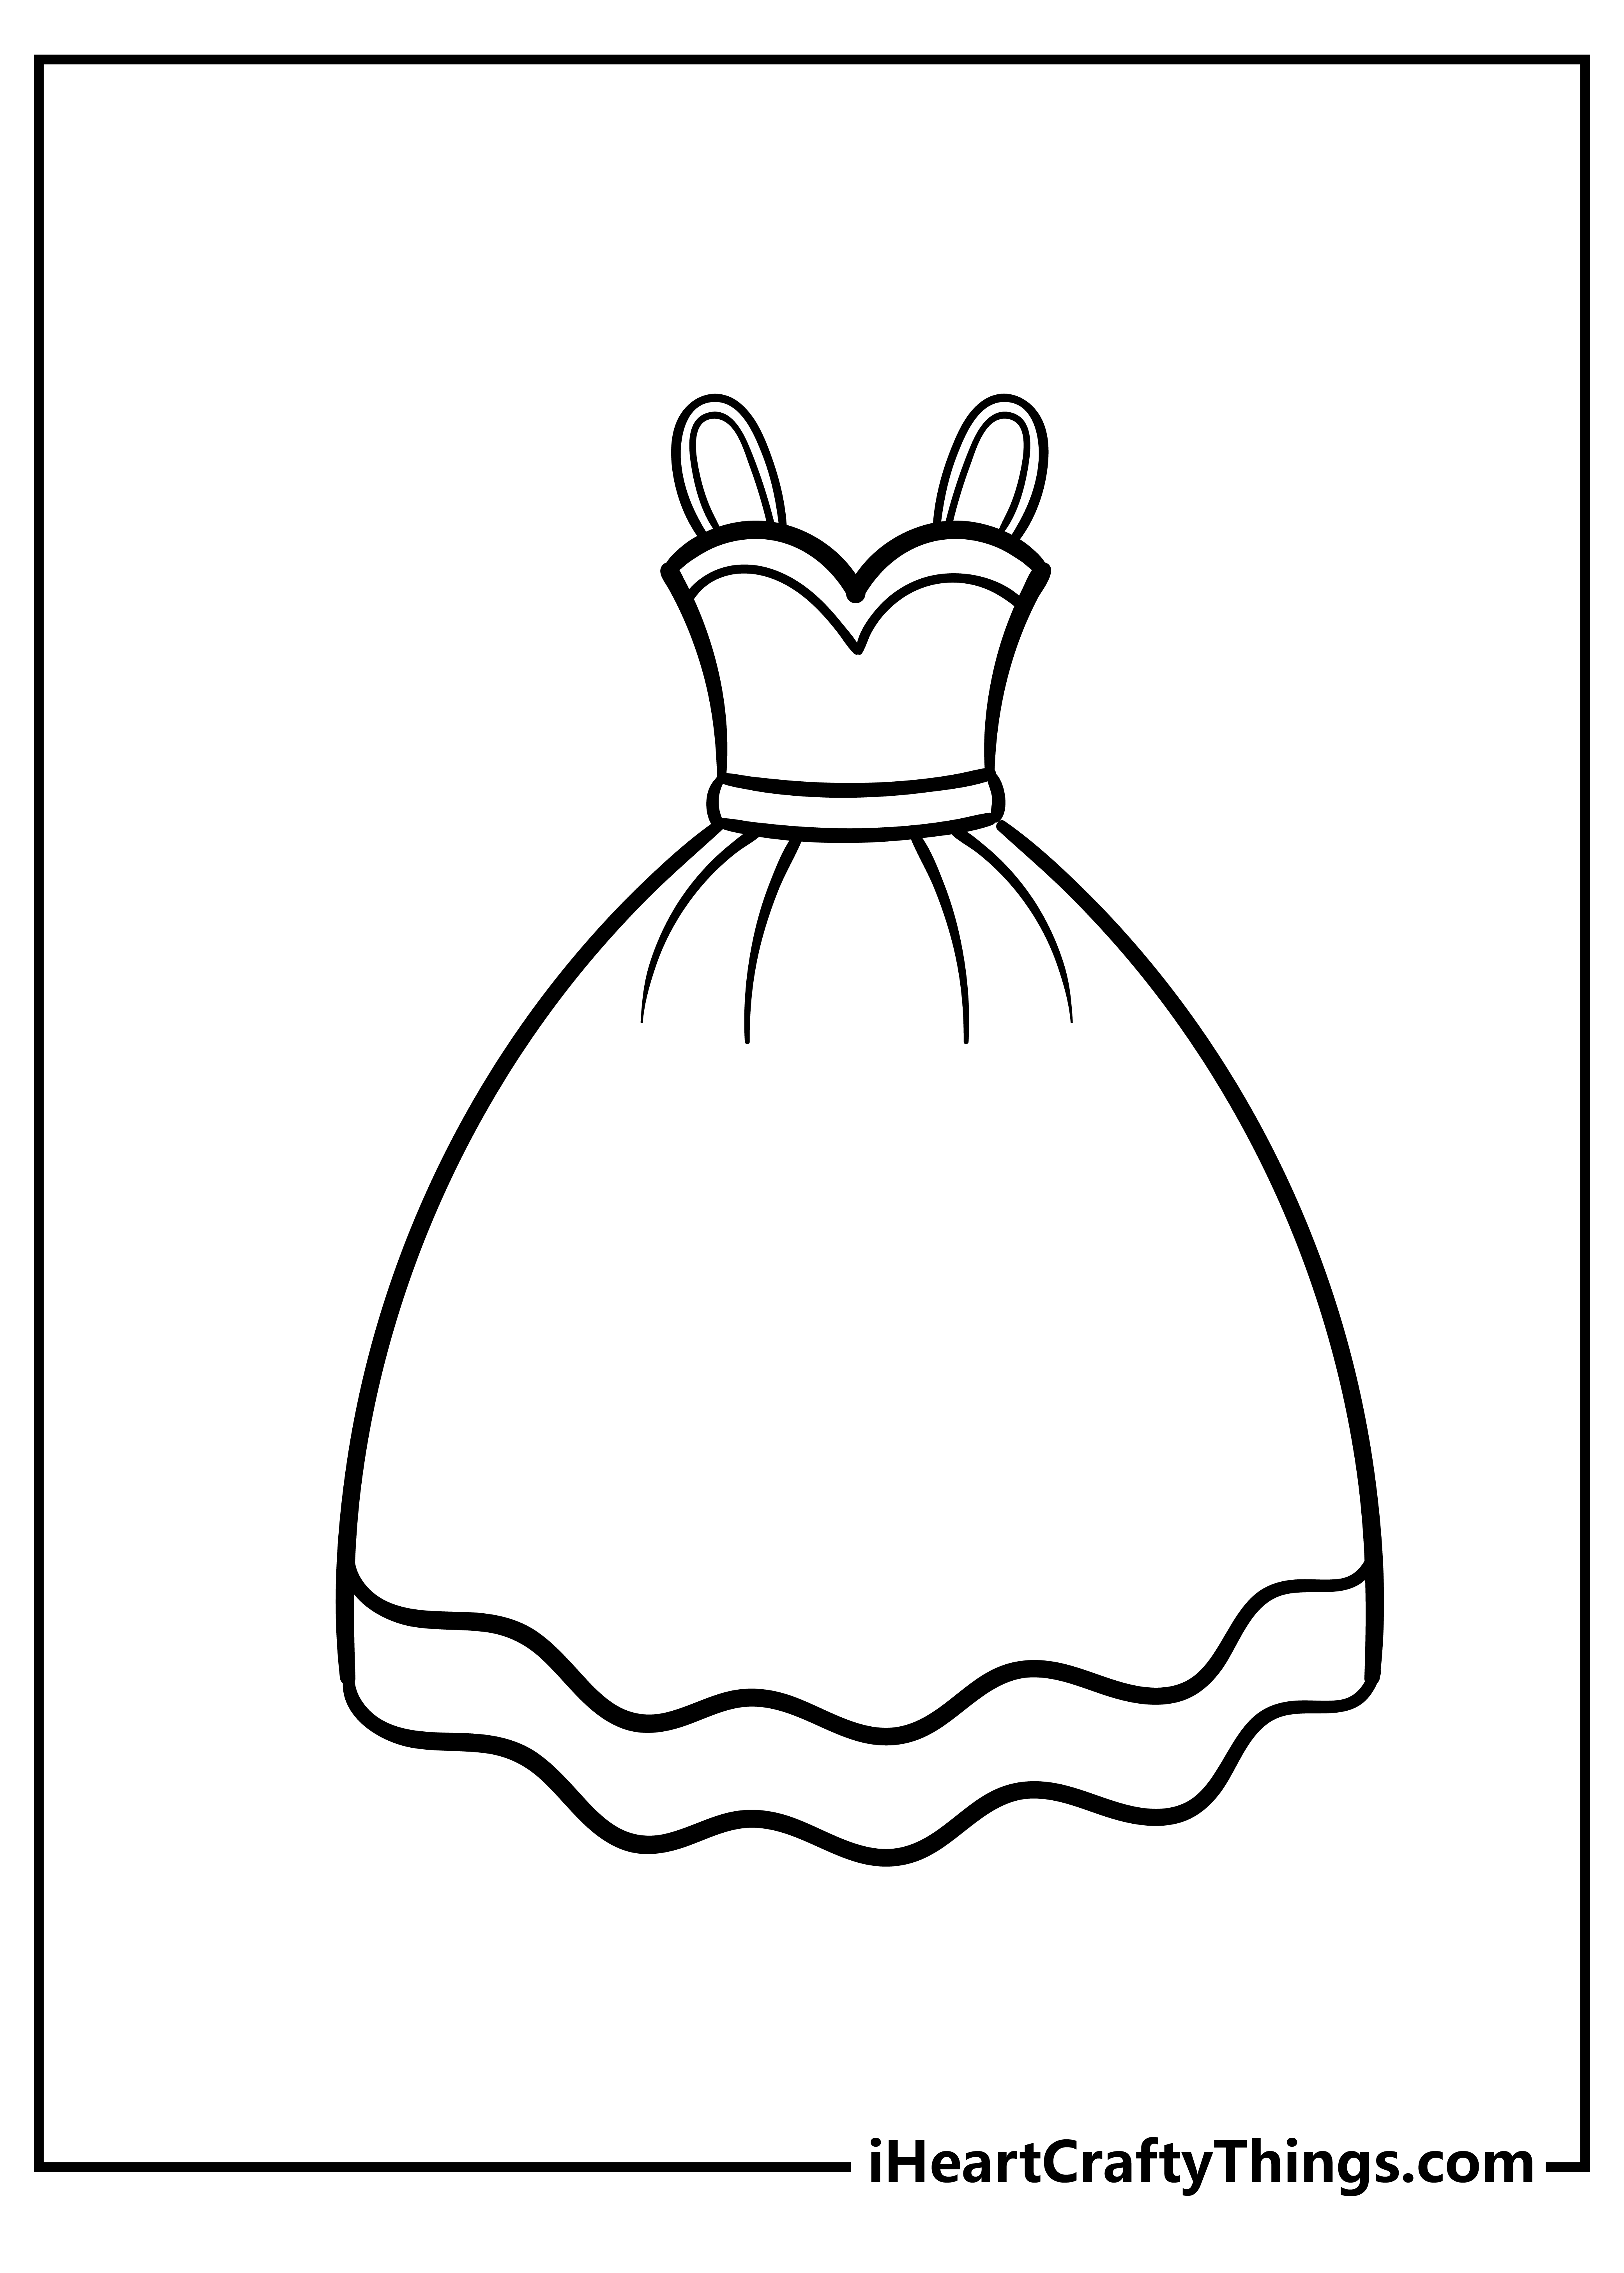 Dress coloring pages free printables